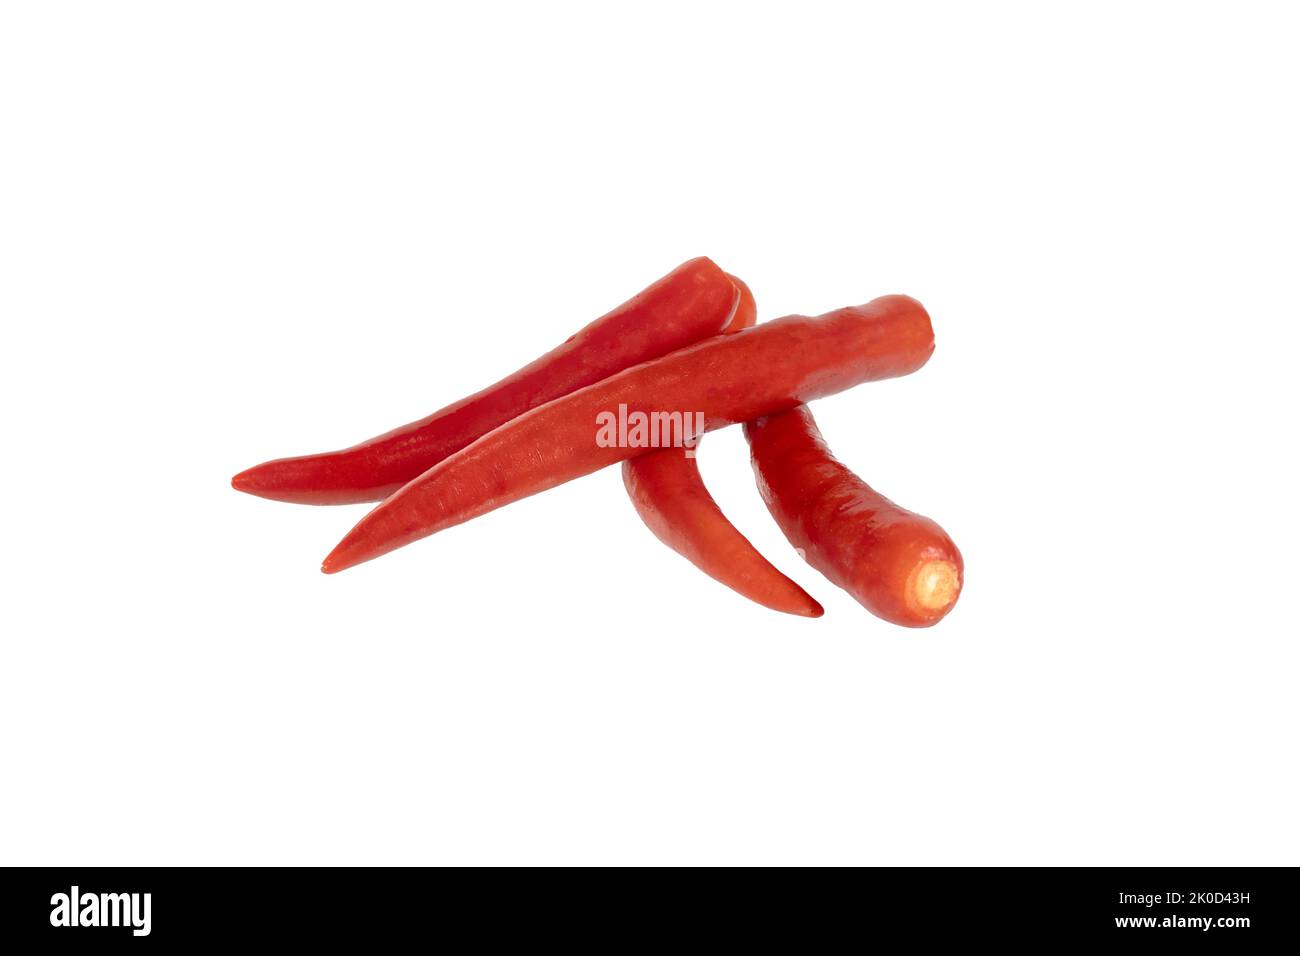 Natural of three chili peppers isolated on white background with clipping path. Stock Photo